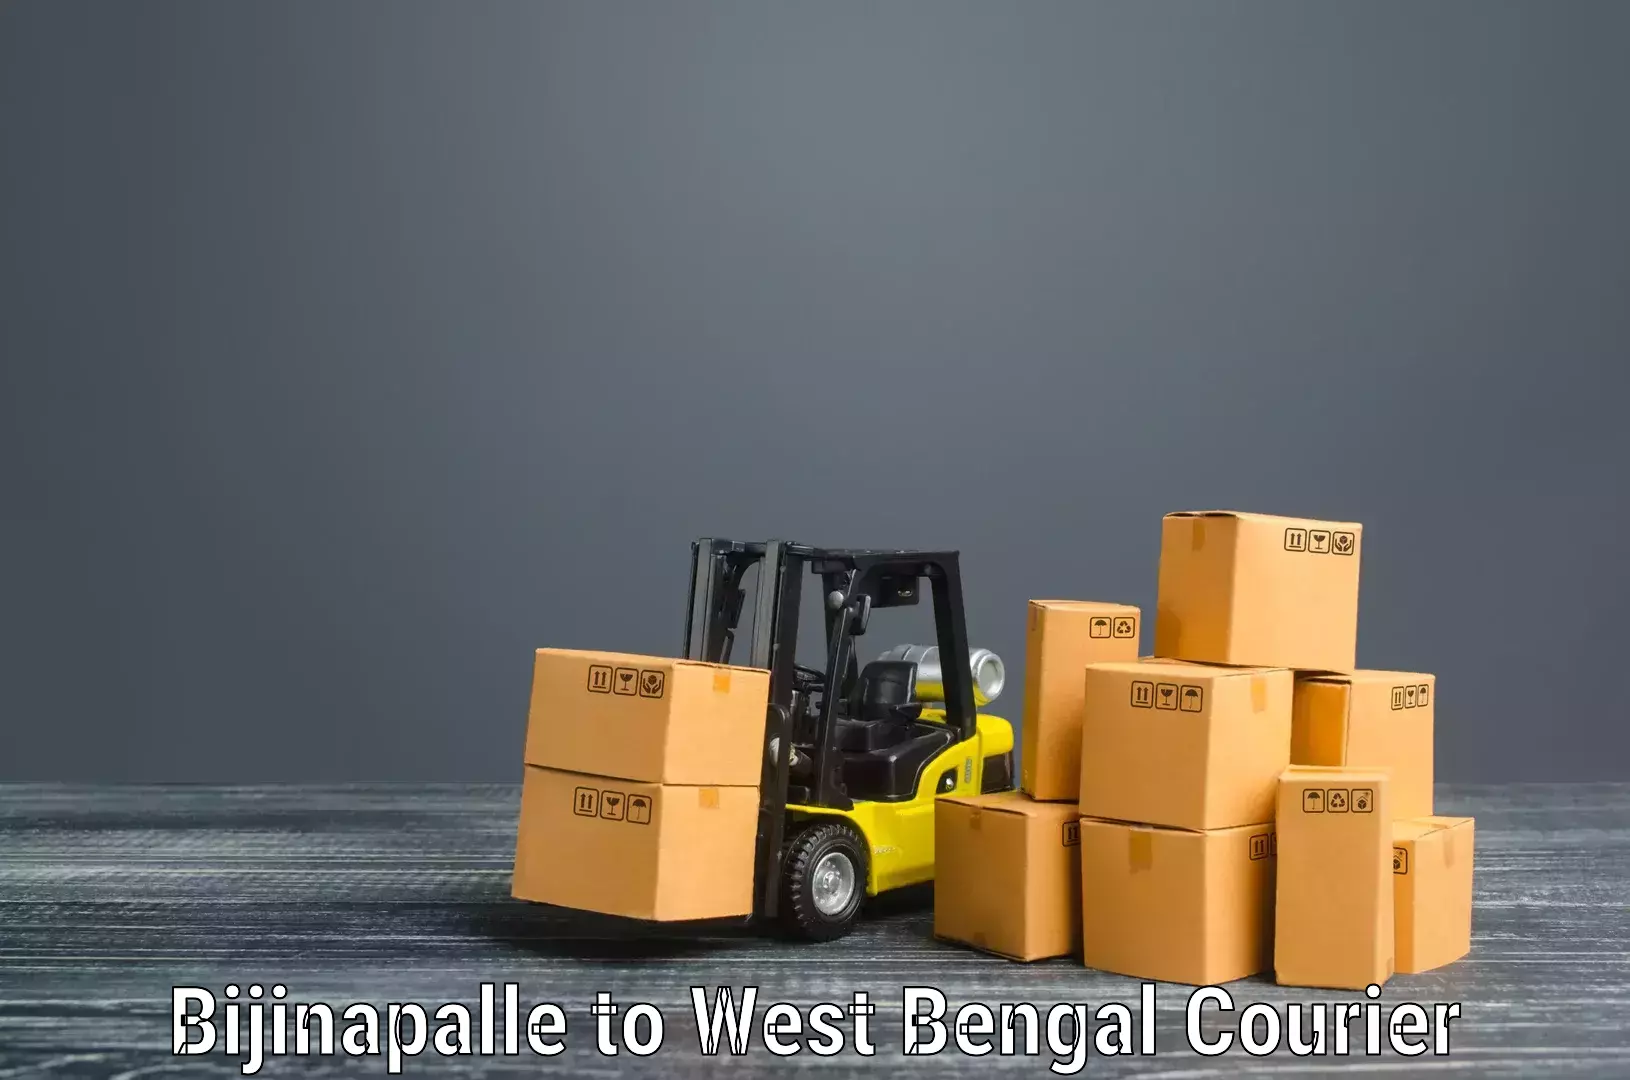 Skilled furniture movers in Bijinapalle to Kalimpong